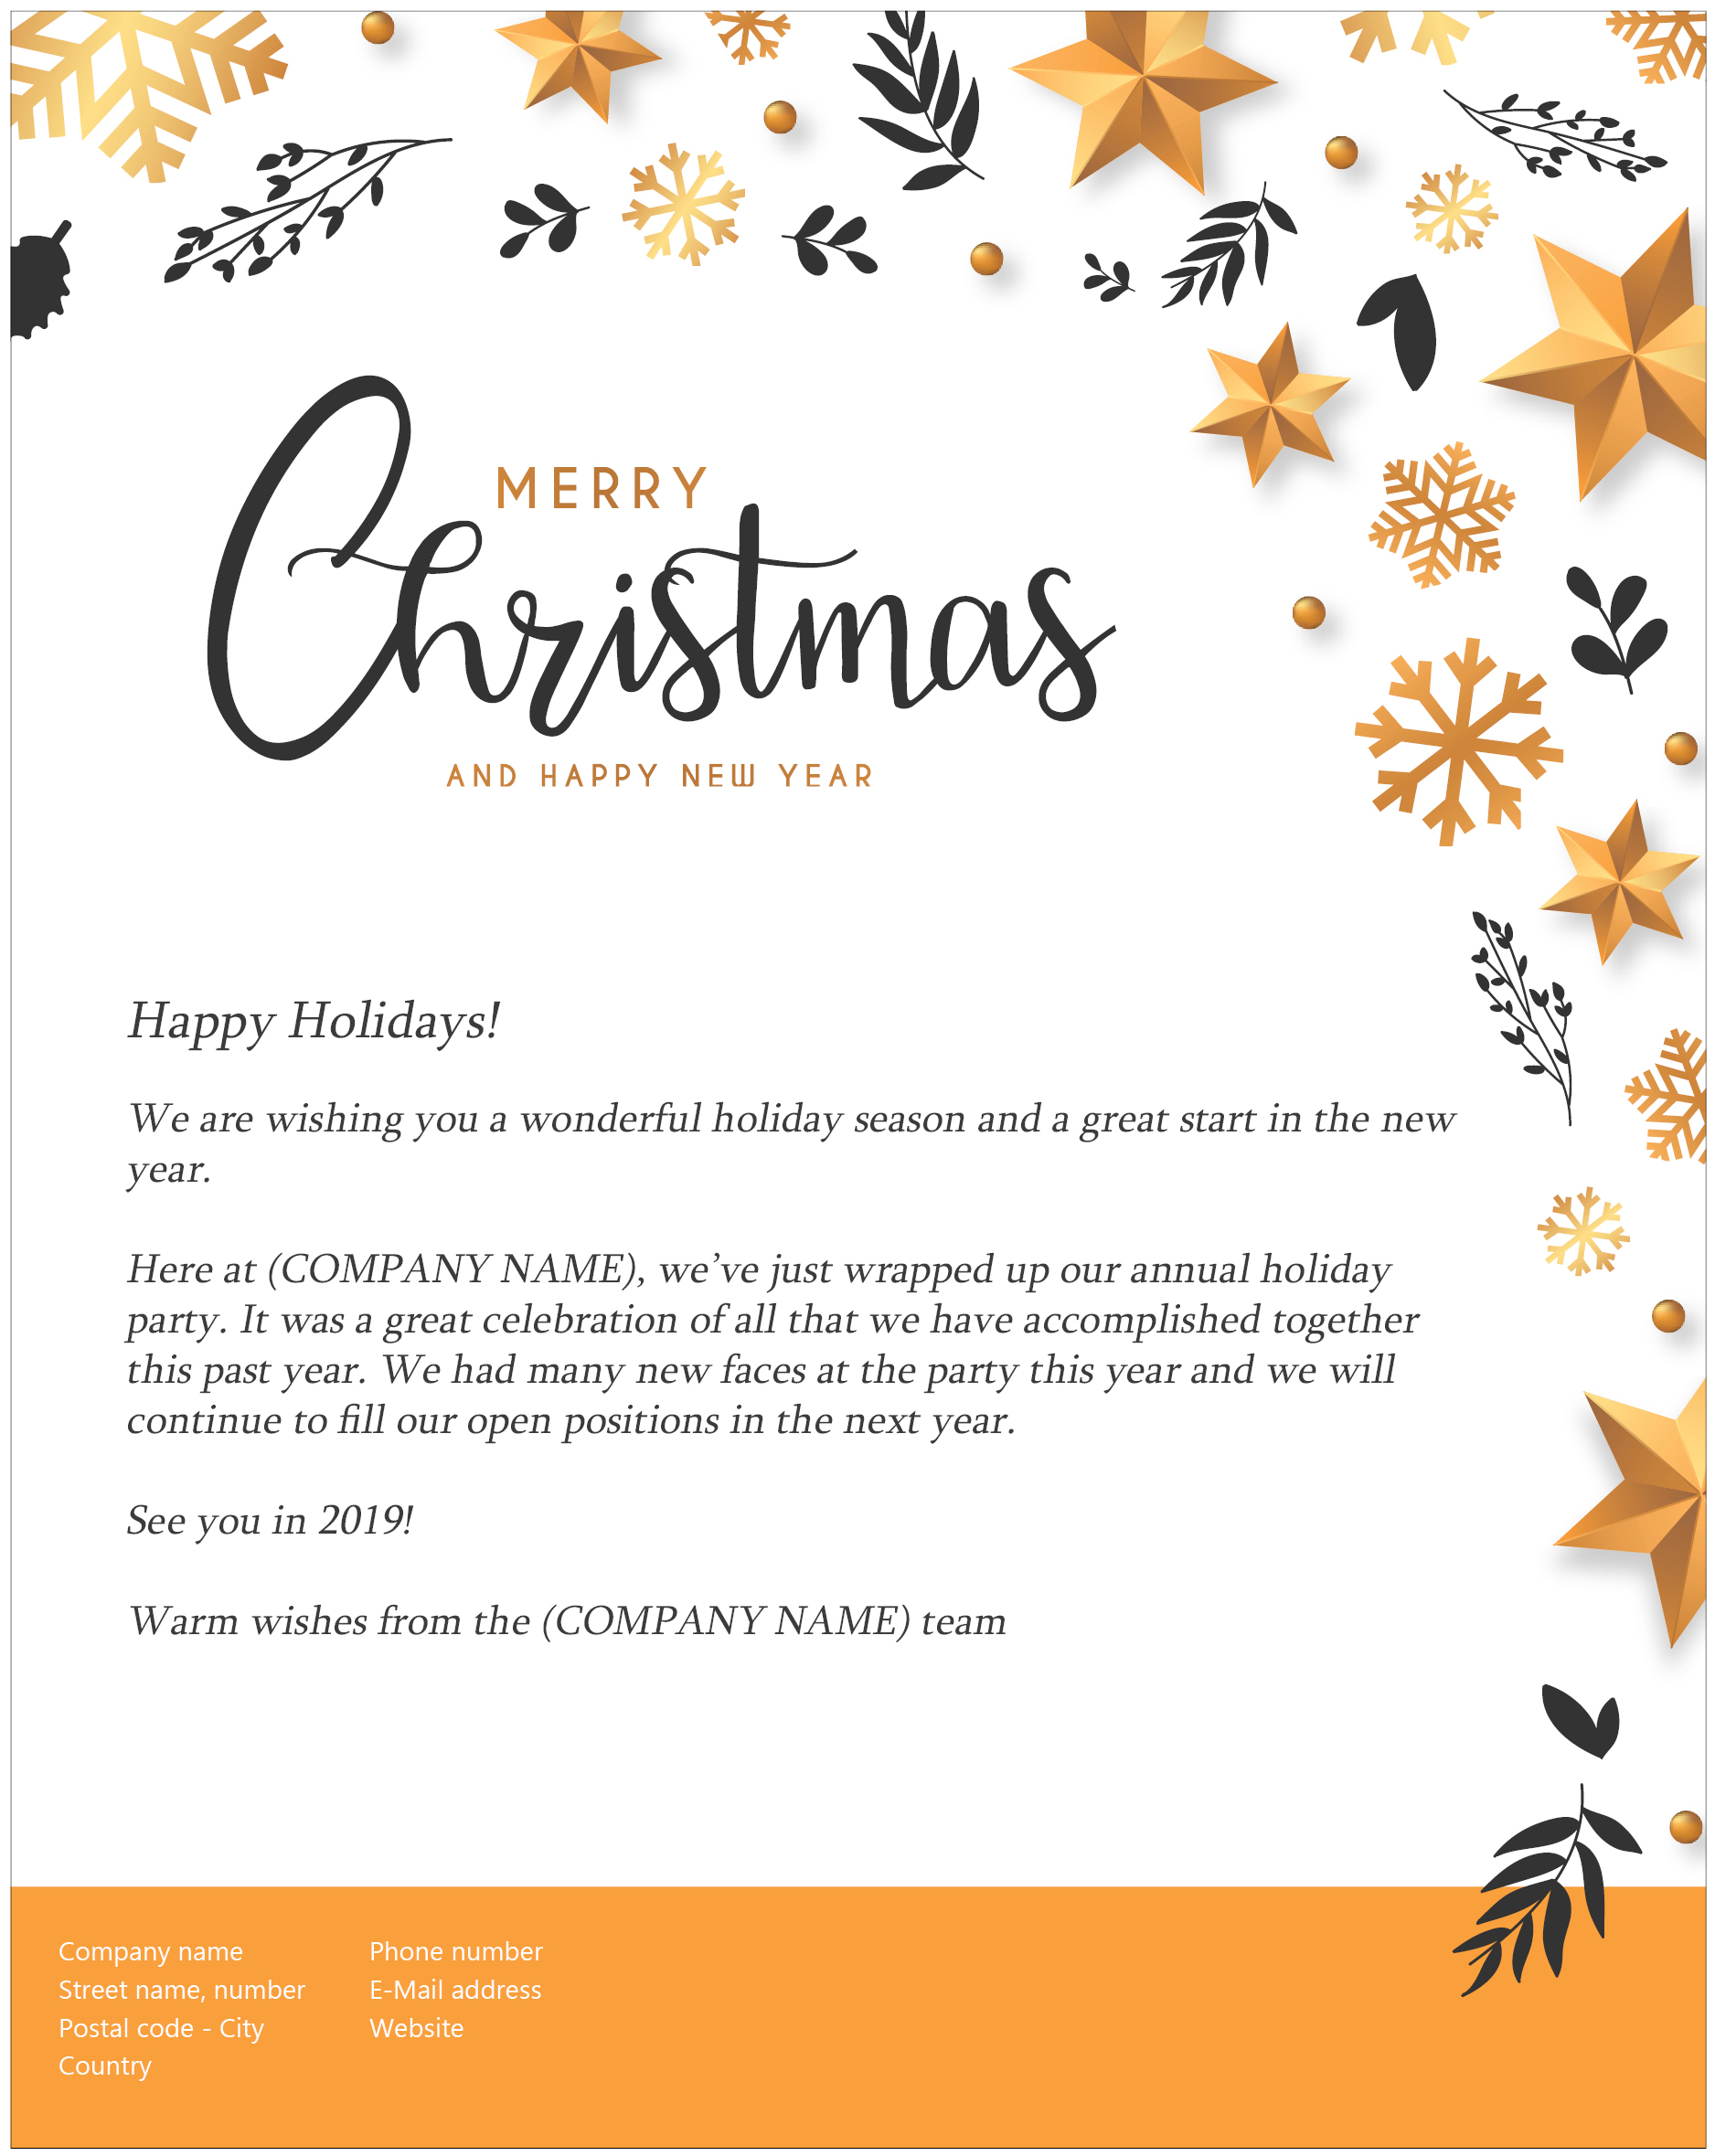 Recruiting at Christmas: 4 Christmas Nurturing Newsletter Examples